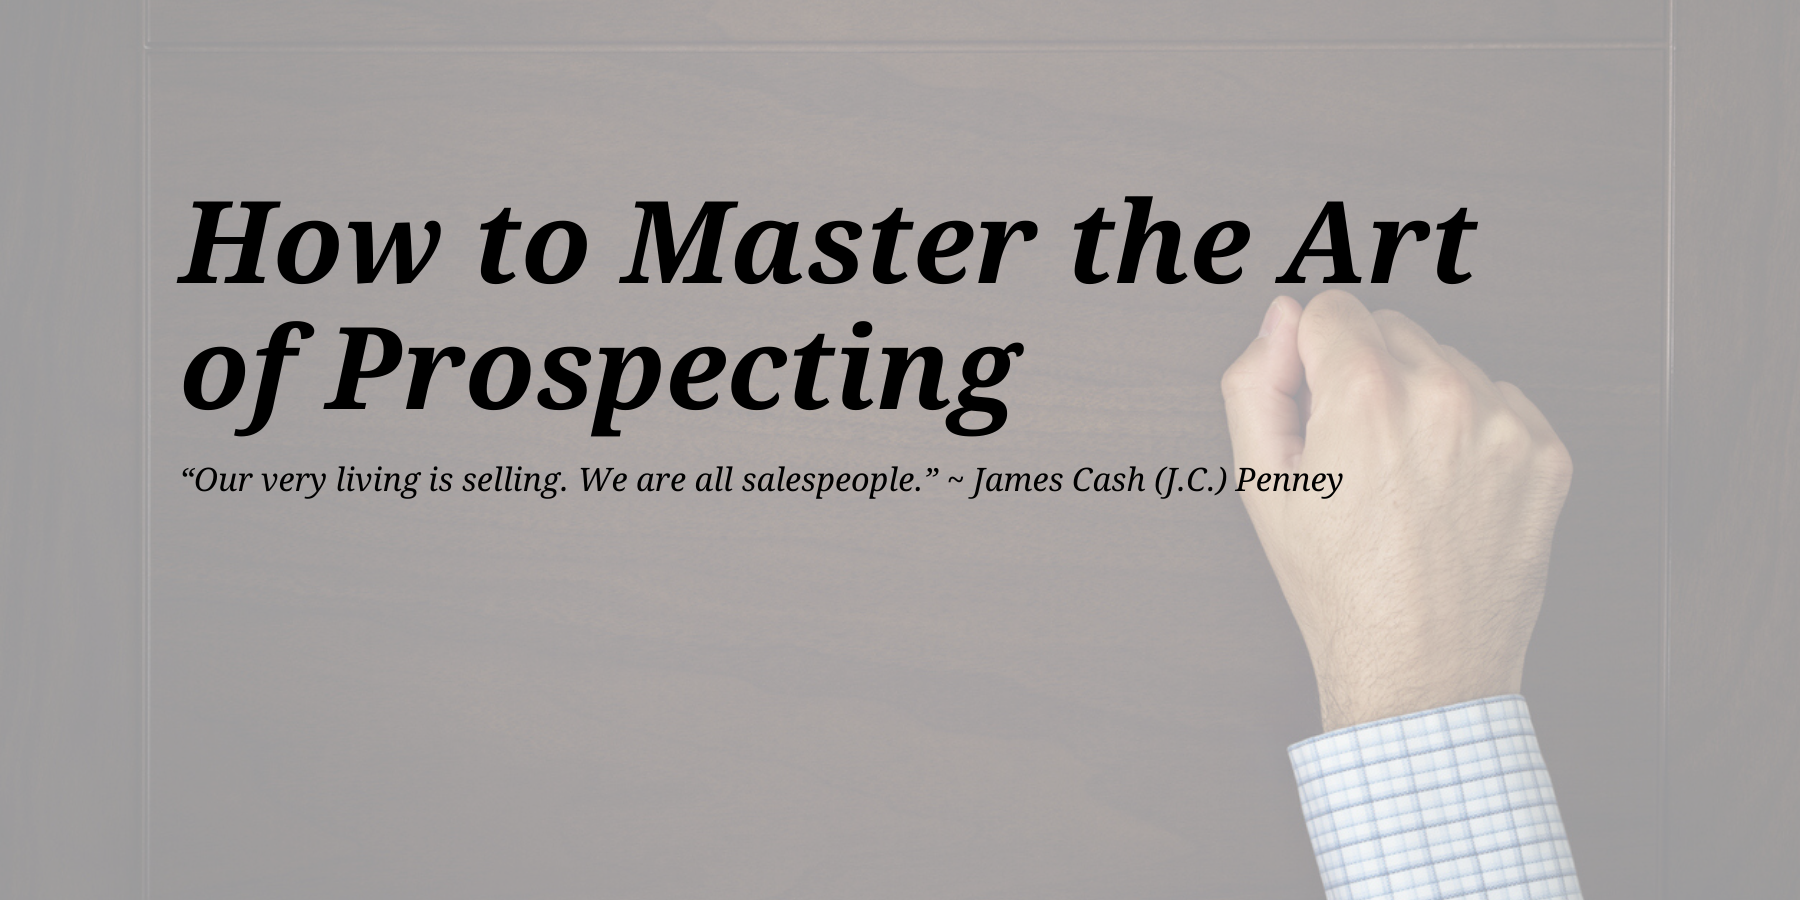 How To Master the Art of Prospecting